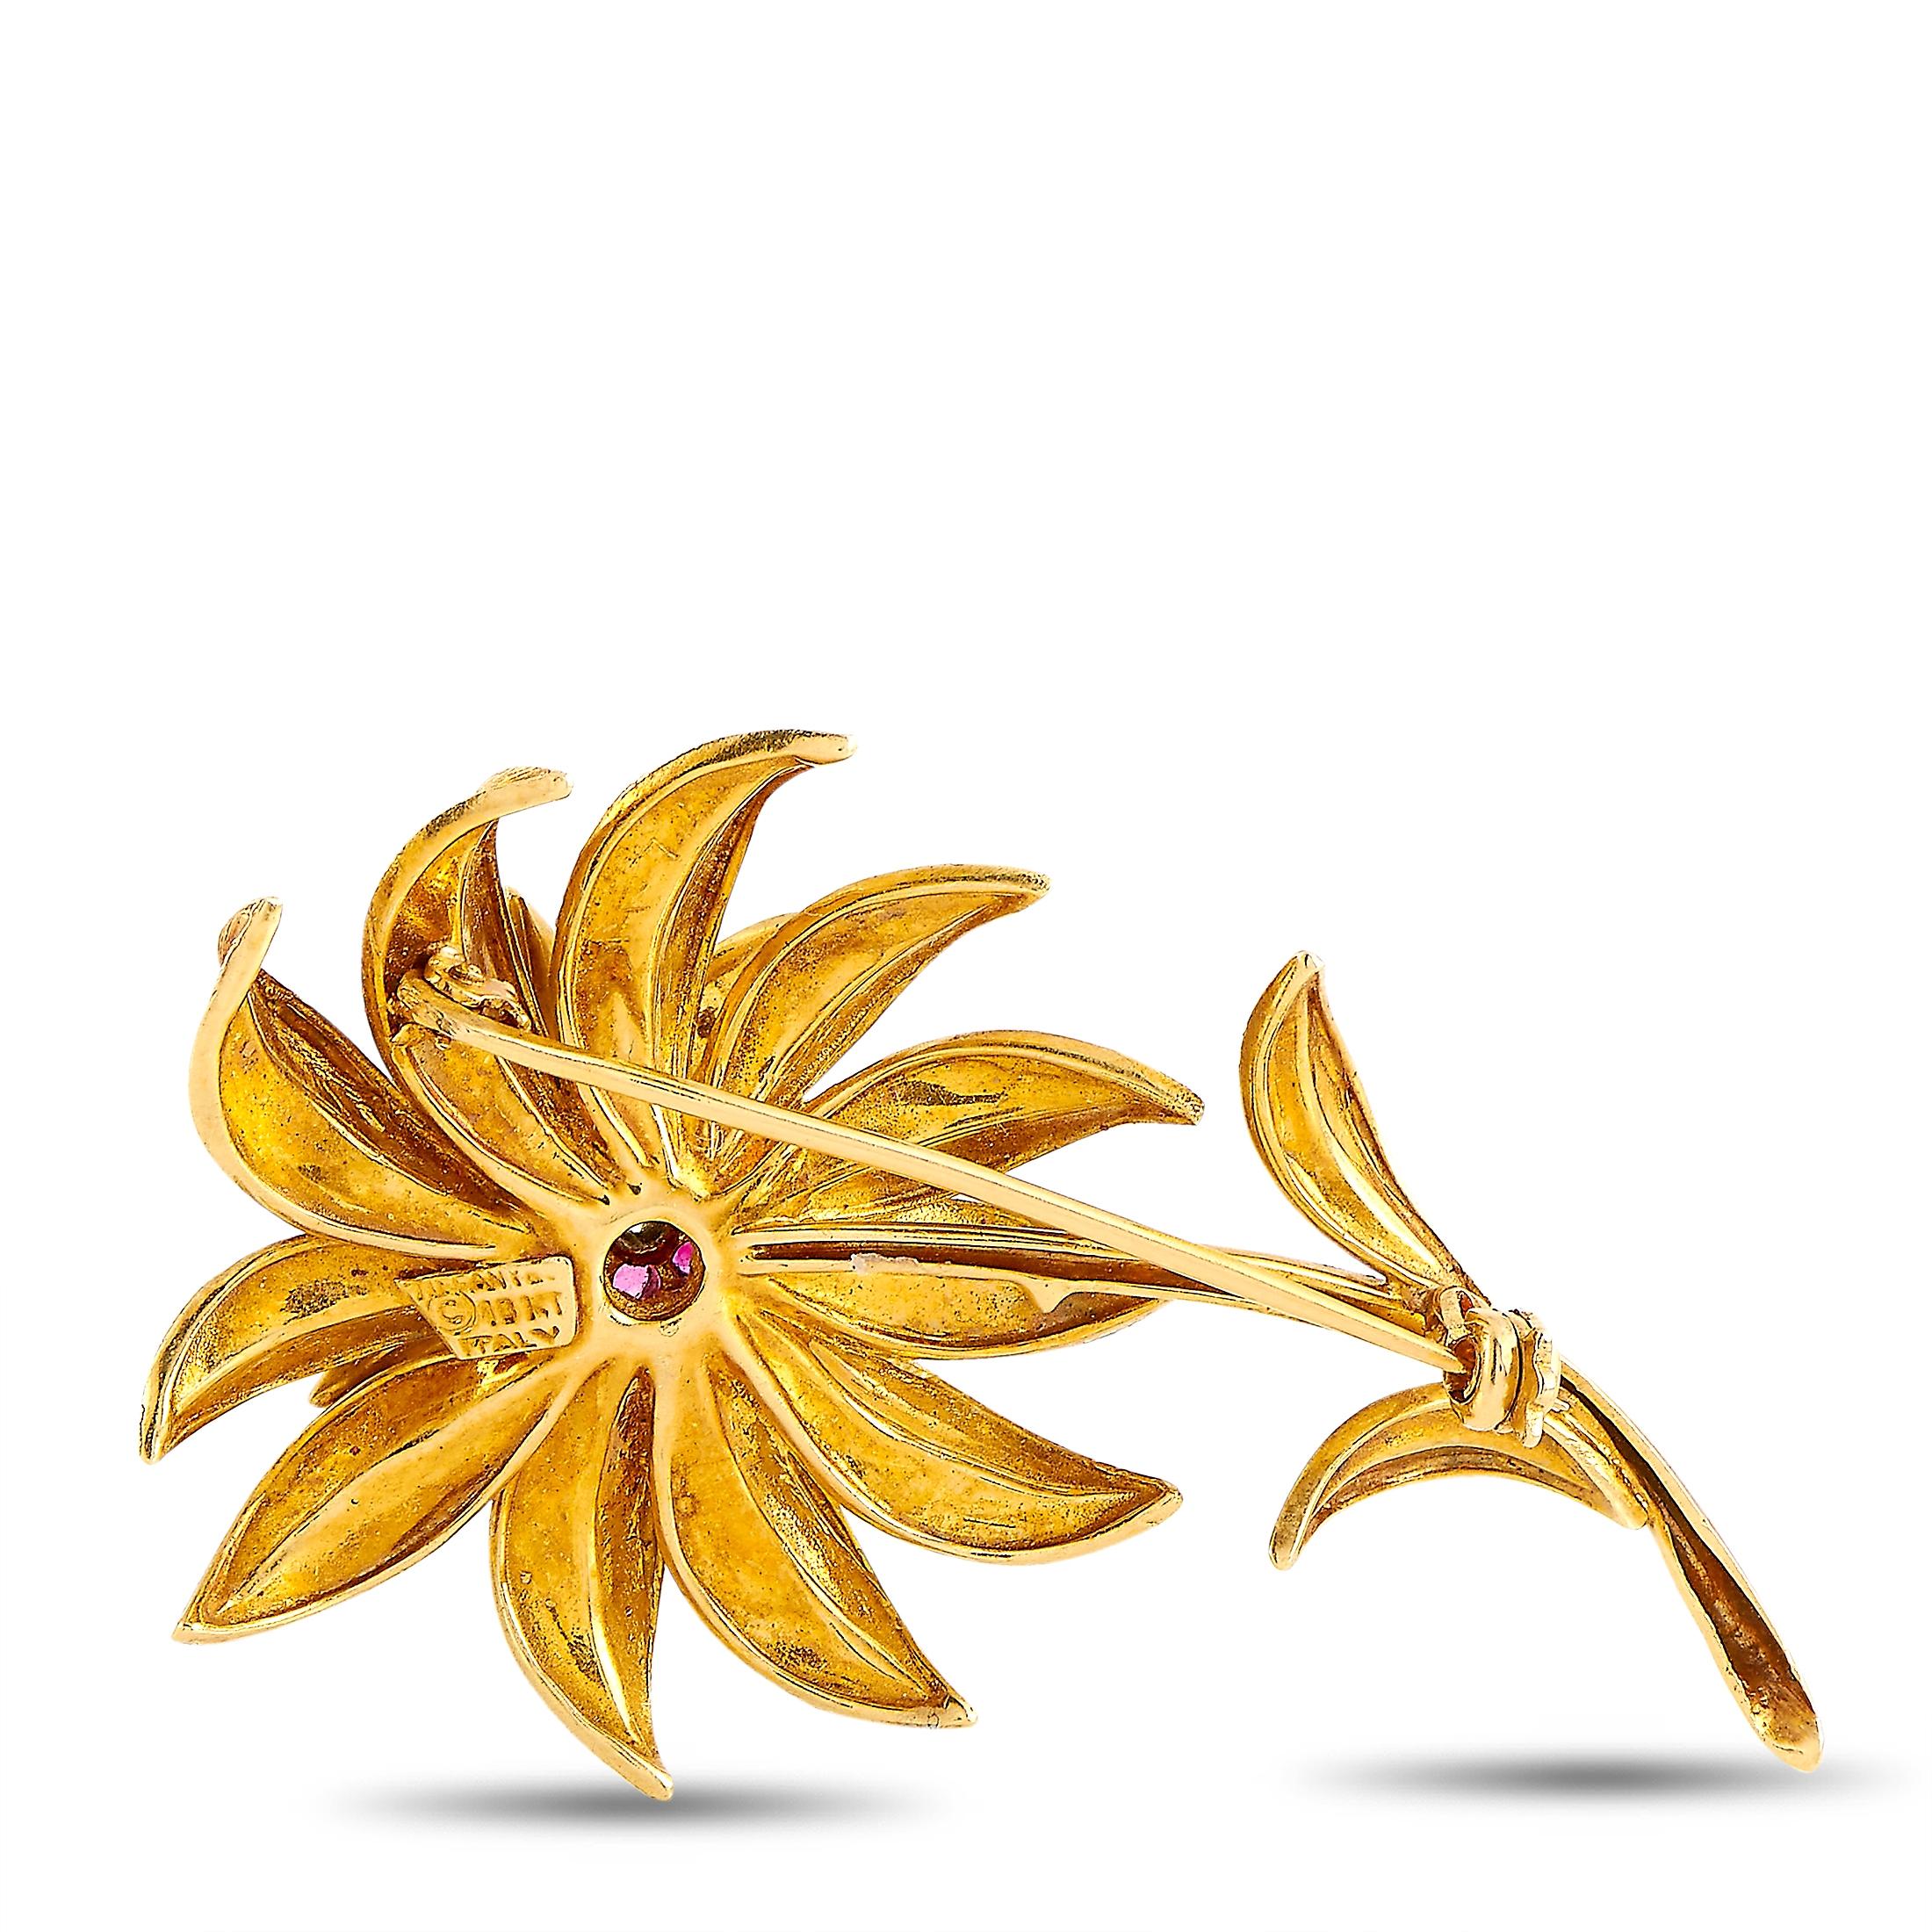 This Tiffany & Co. flower brooch is made of 18K yellow gold and embellished with rubies and a diamond. The brooch weighs 15.4 grams and measures 2.25” in length and 1.37” in width.
 
 Offered in estate condition, this item includes the